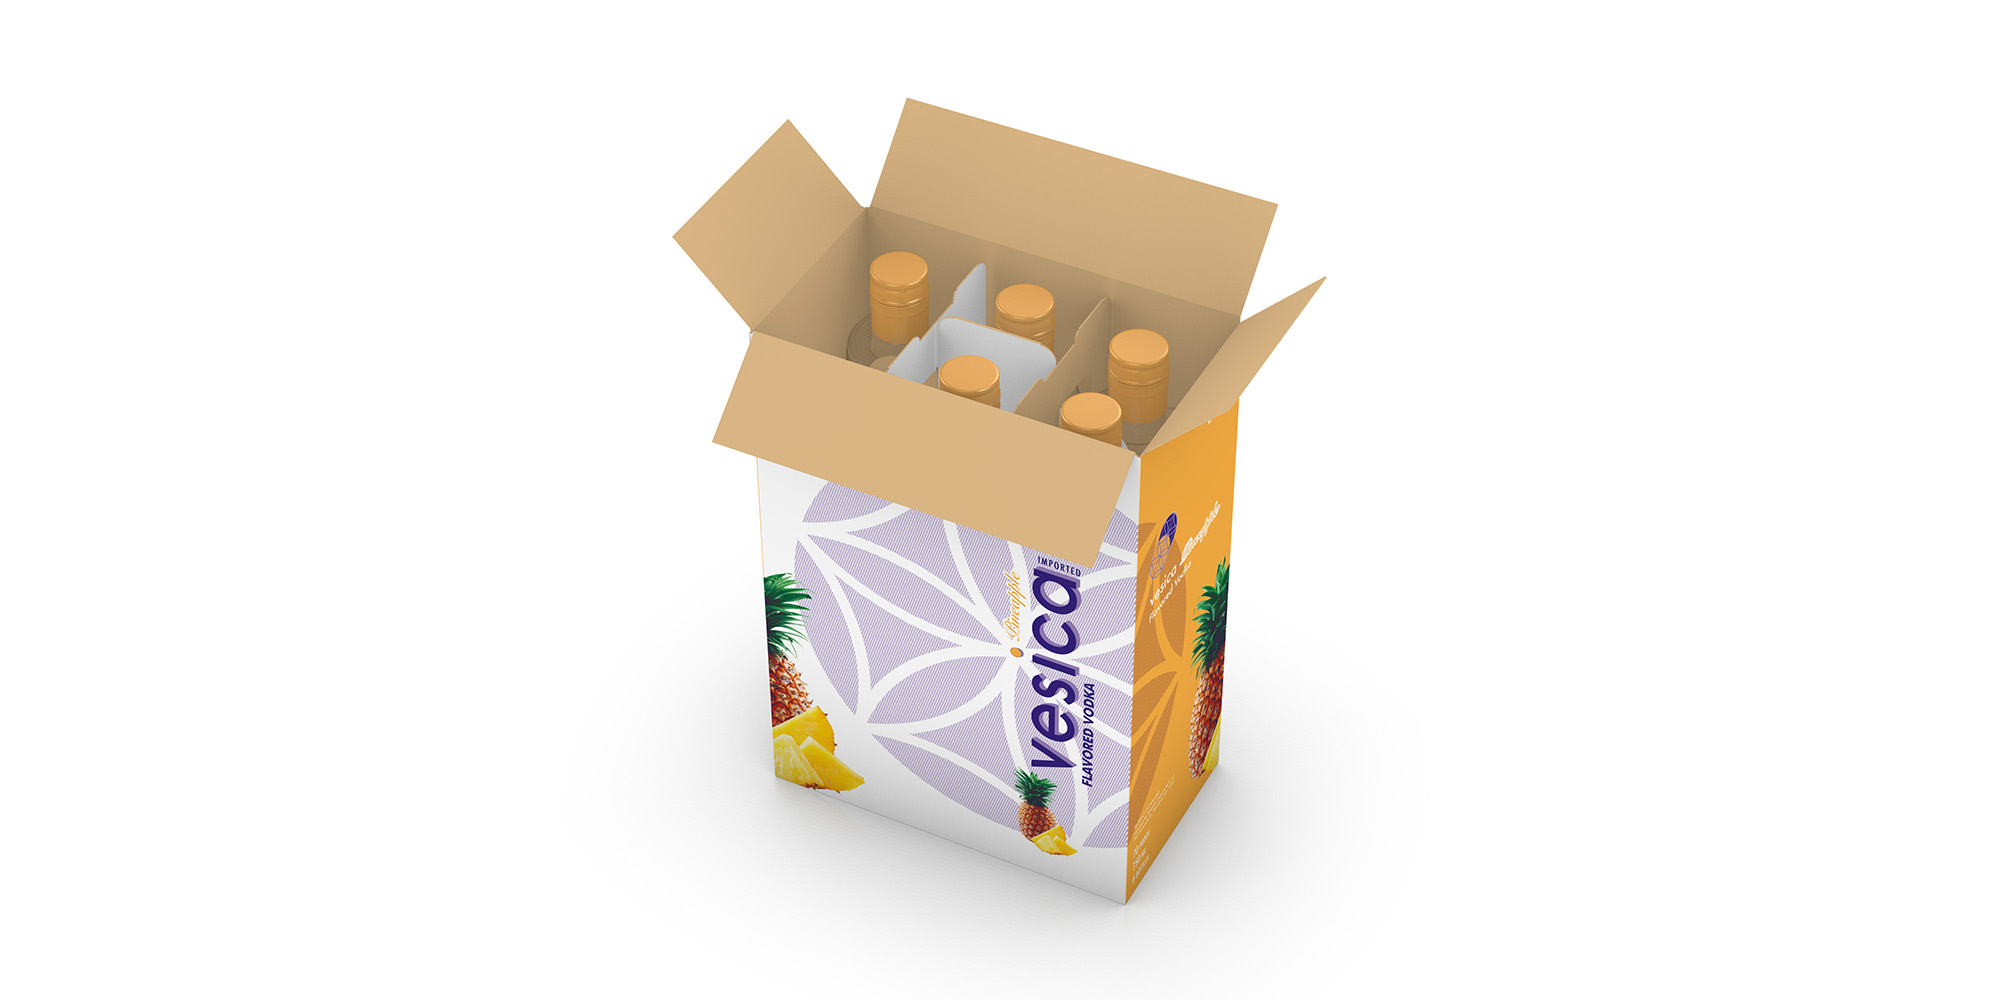 Box of bottles made and rendered in Boxshot